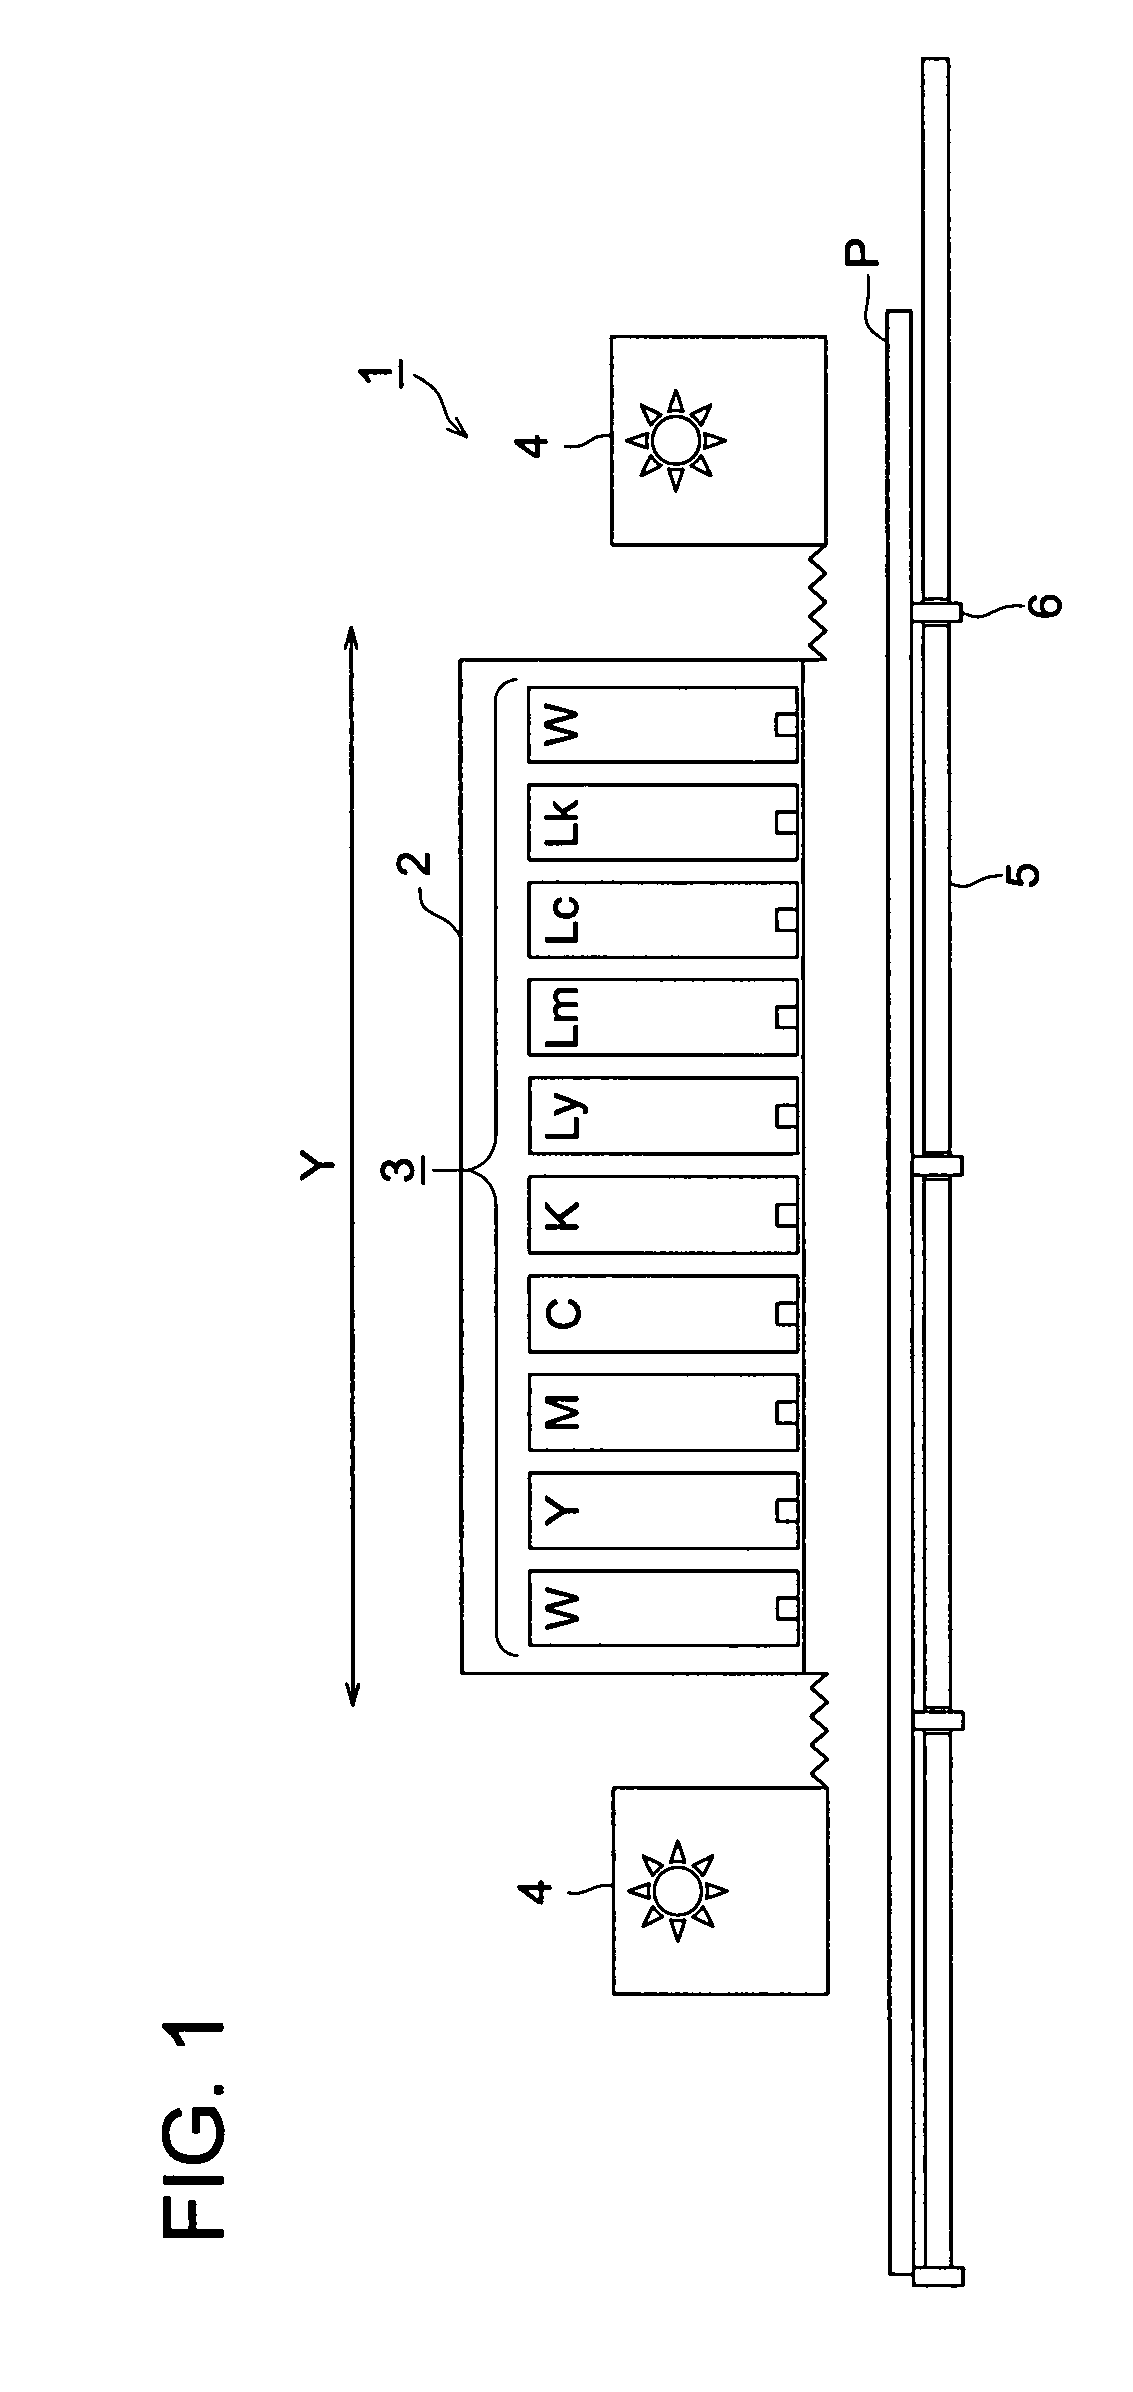 Image recording method and image recording apparatus employing the same